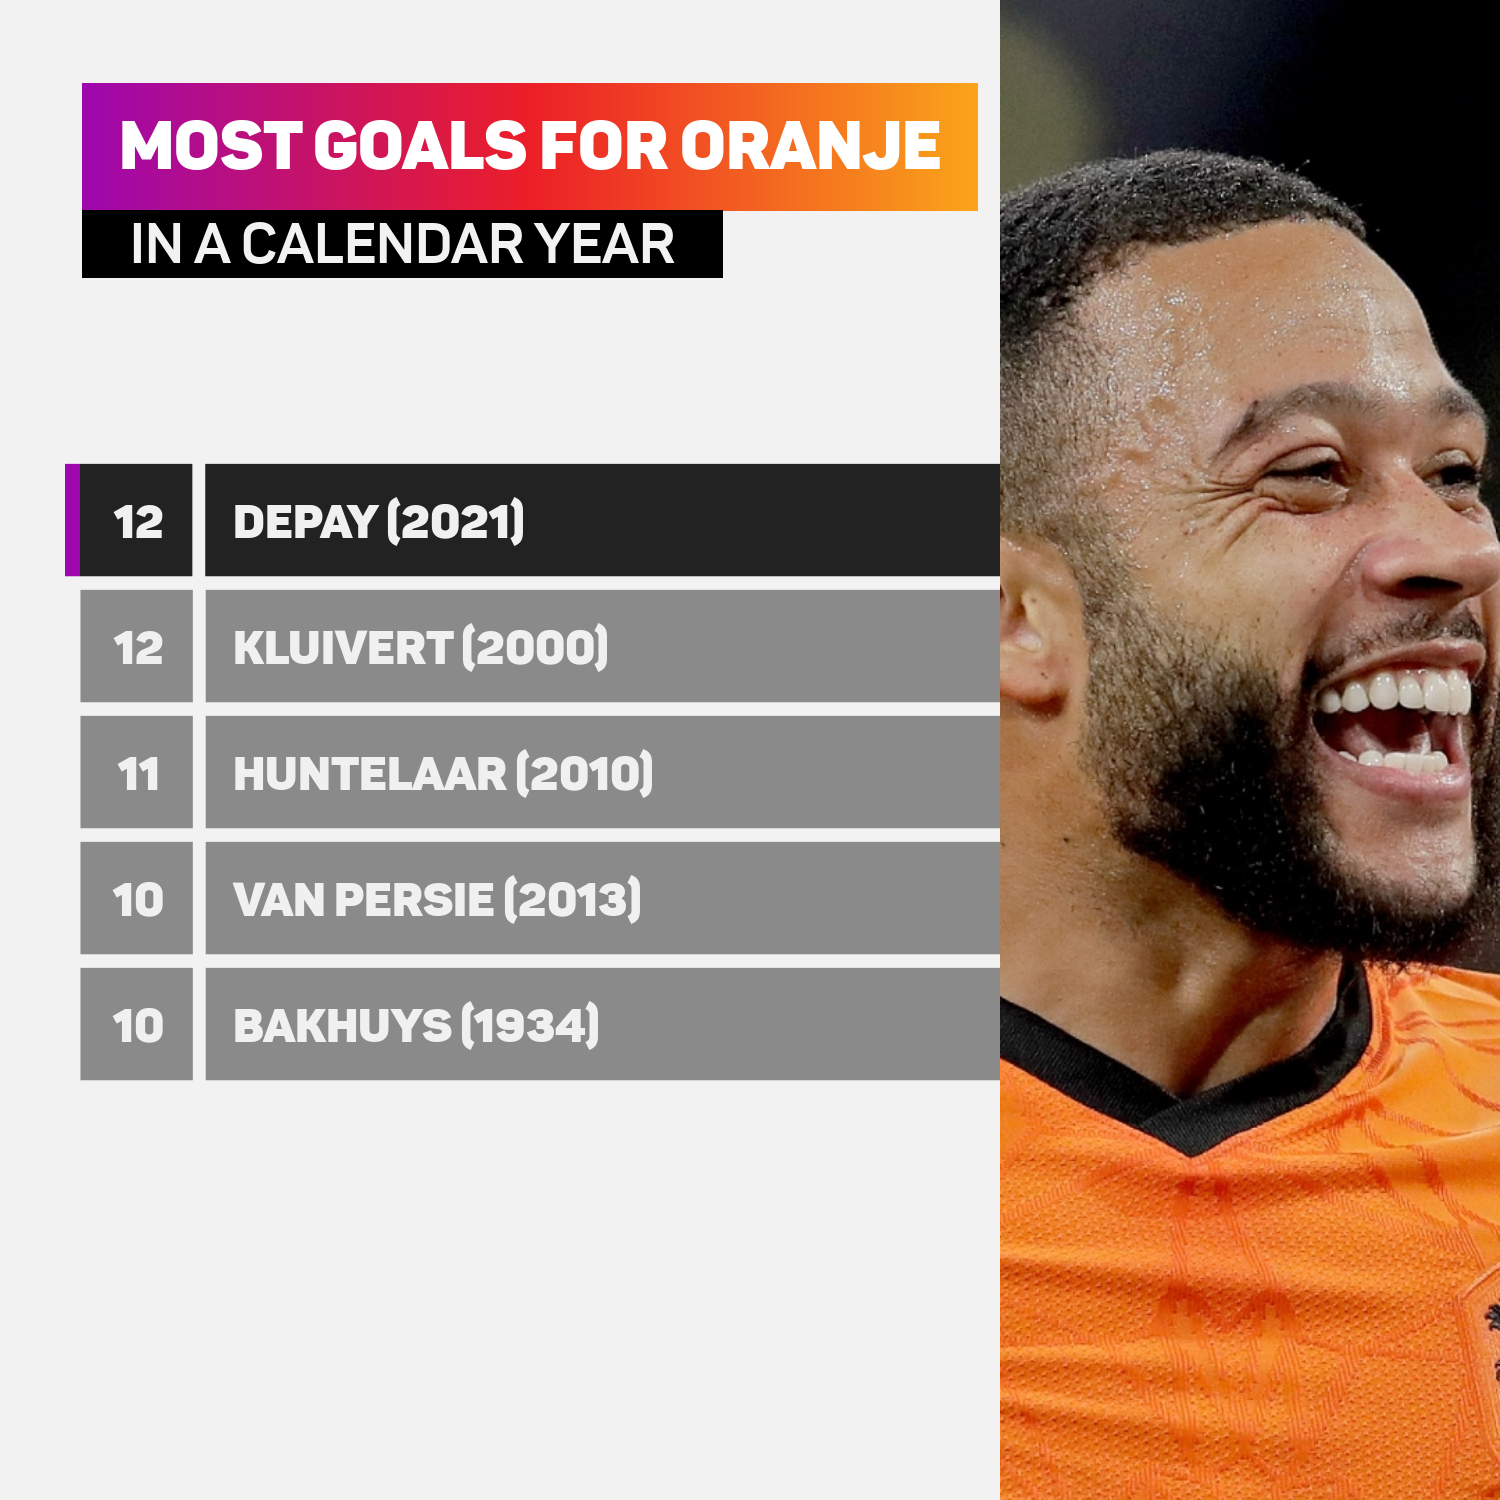 Memphis Depay has scored 12 goals for the Netherlands in 2021